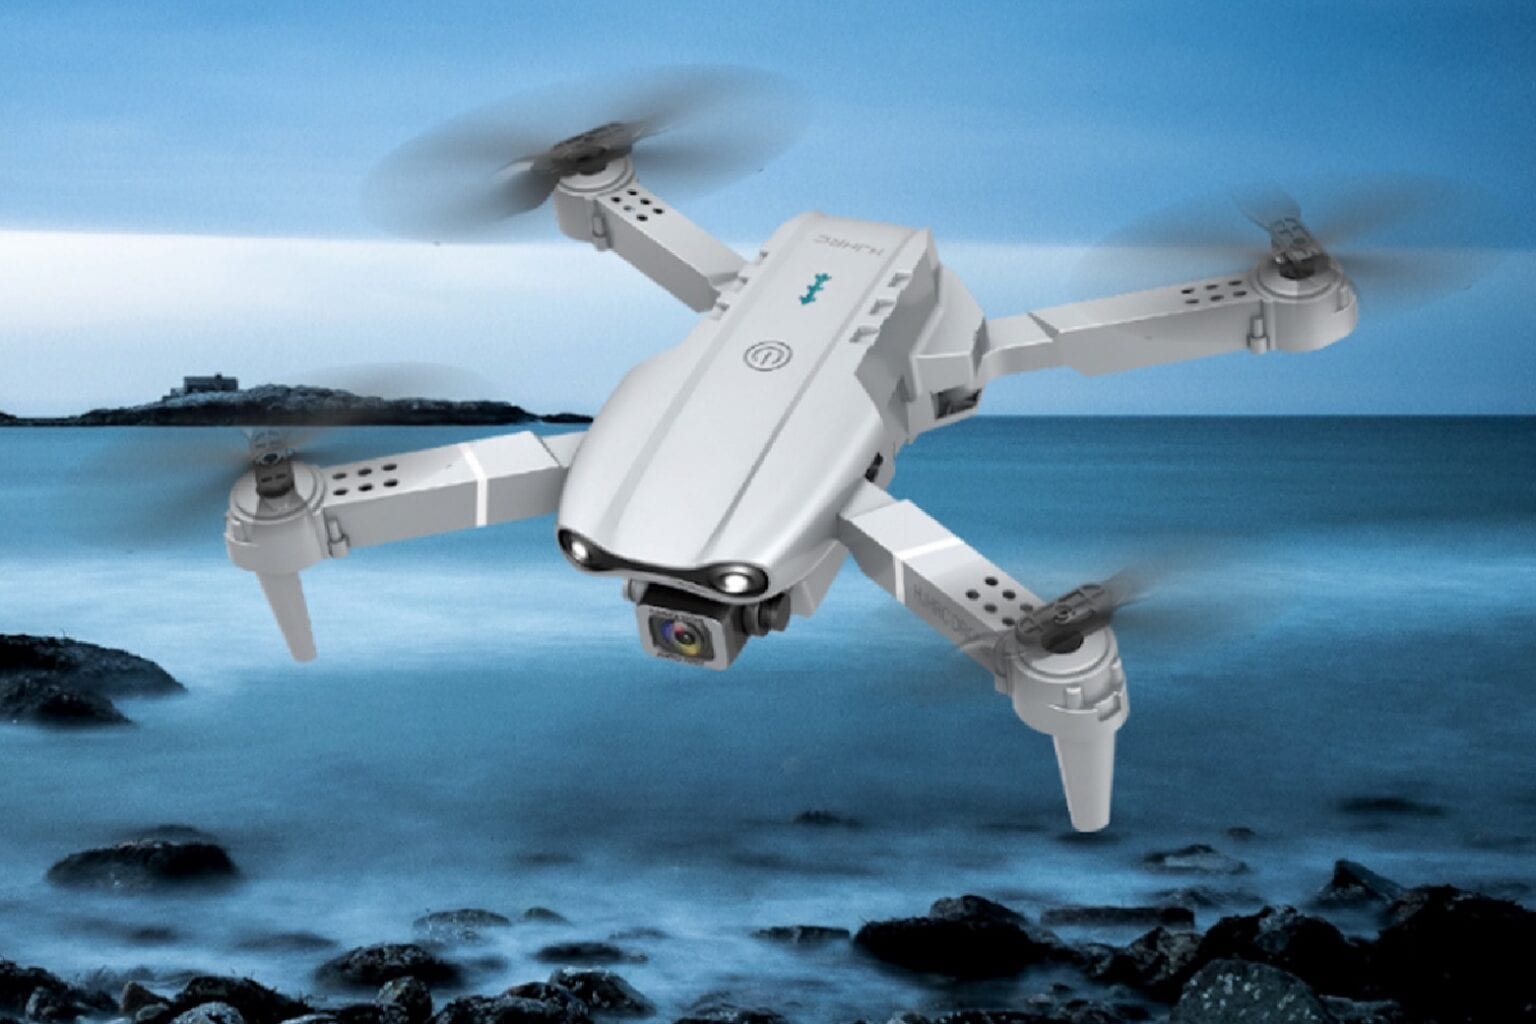 Get a bundle of 2 top-selling 4K camera drones for only $109.97.